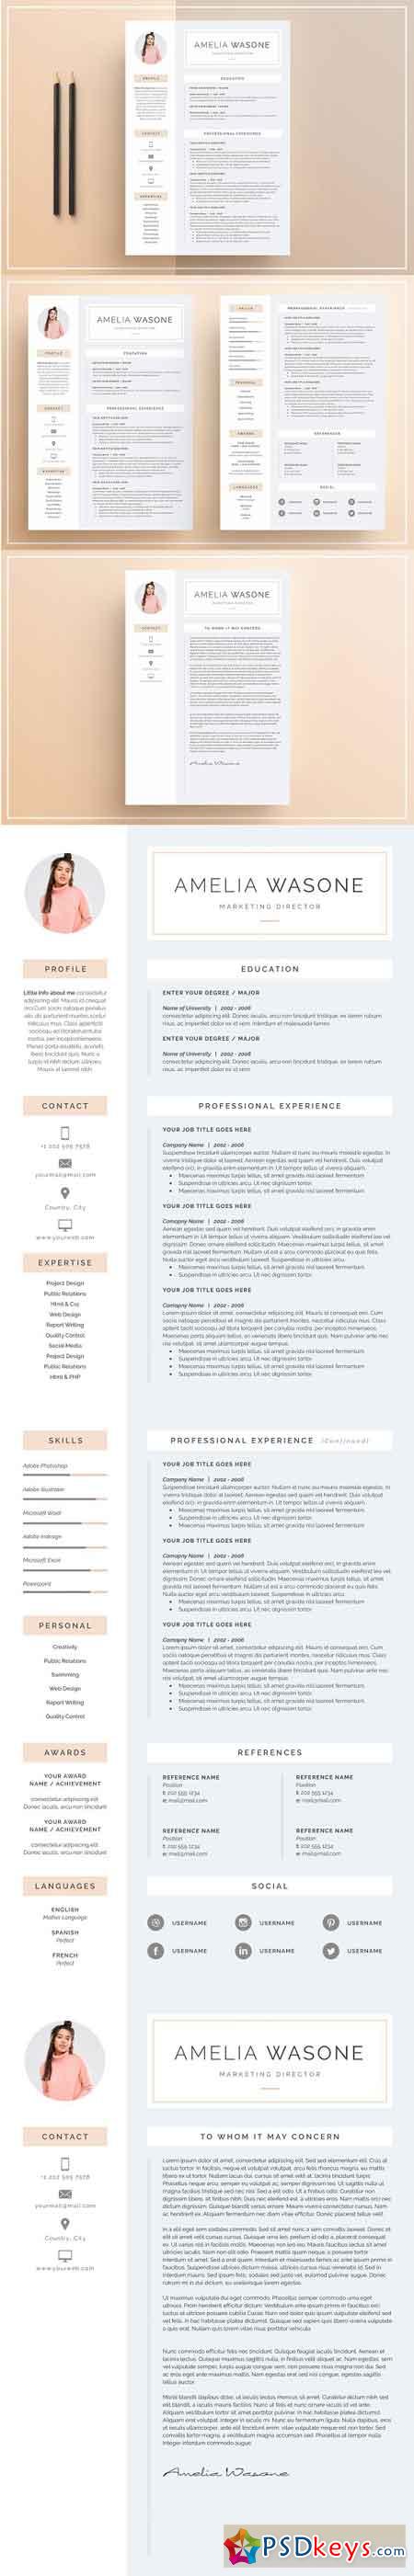 word resume  u0026 cover letter template 1173571  u00bb free download photoshop vector stock image via